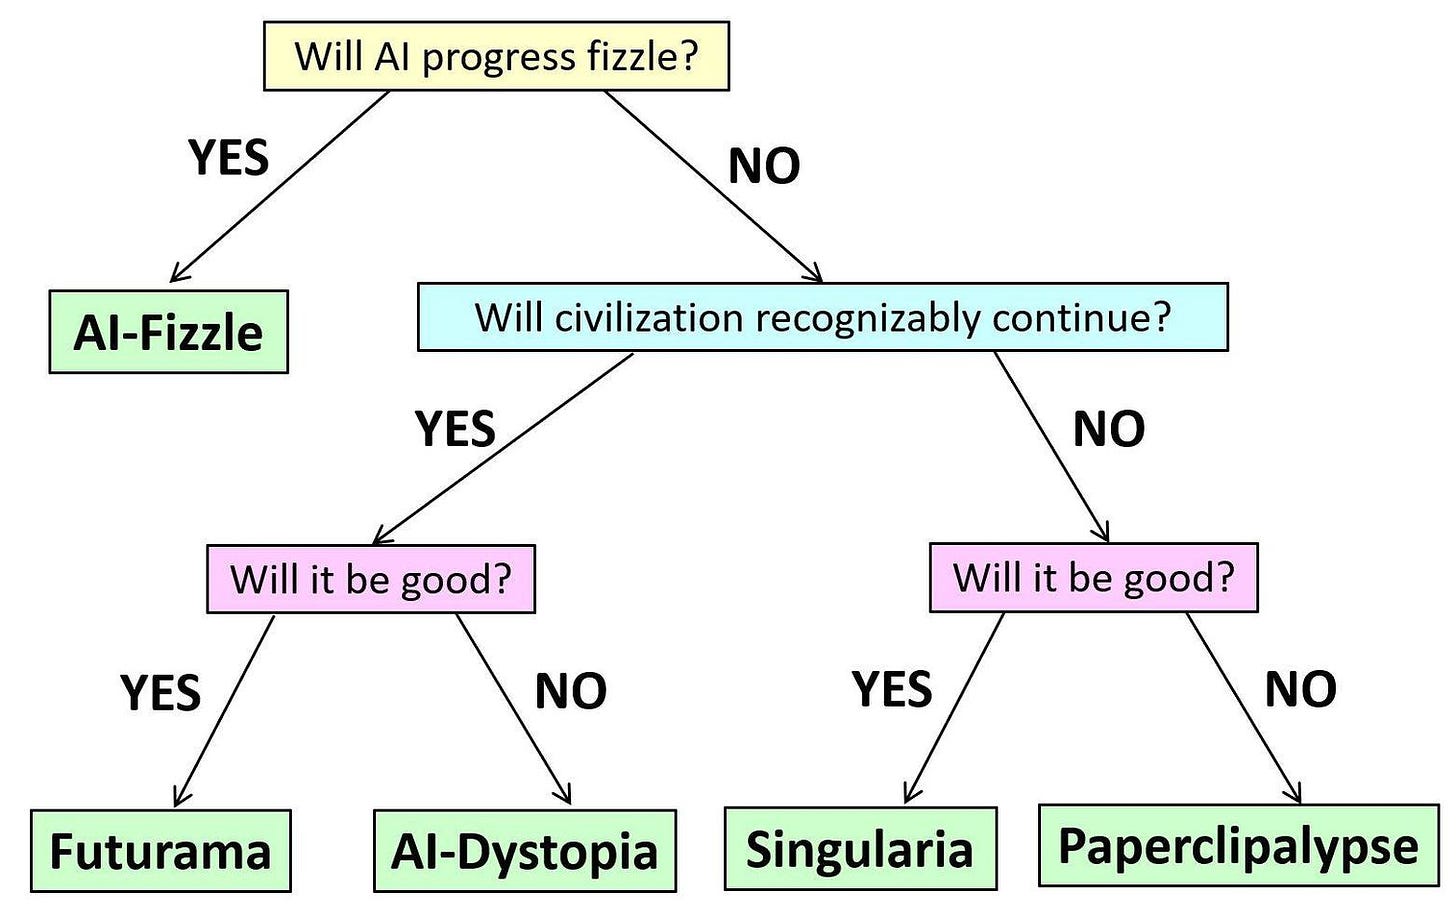 May be a graphic of text that says 'Will AI progress fizzle? YES NO AI-Fizzle Will civilization recognizably continue? YES Will it be good? NO YES YES Will it be good? NO YES Futurama NO Al-Dystopia Singularia Paperclipalypse'